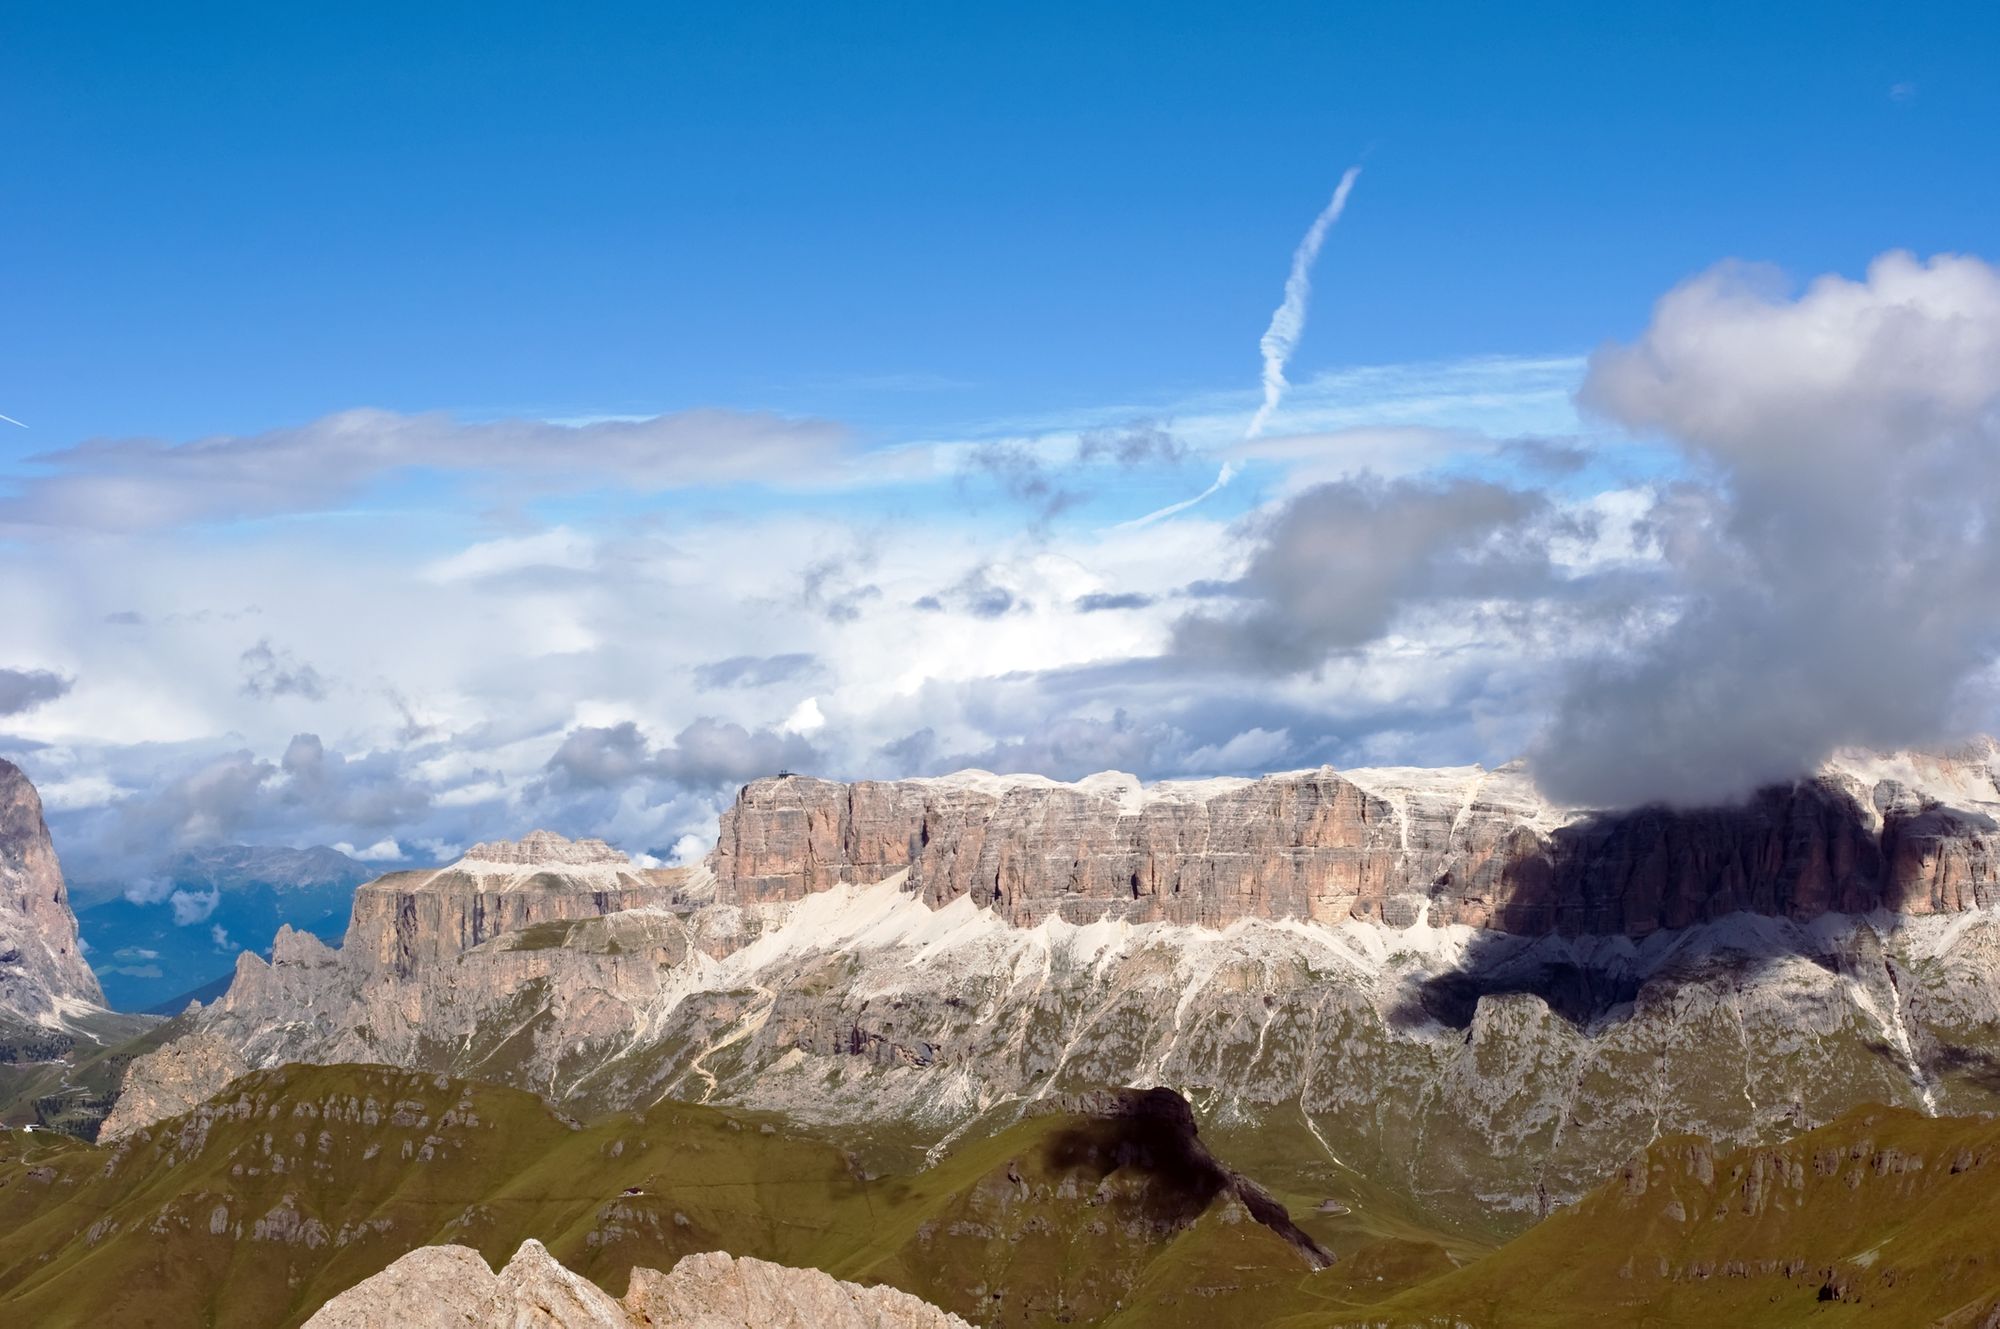 The view from Monte Marmolada, a mountain in the Dolomites.